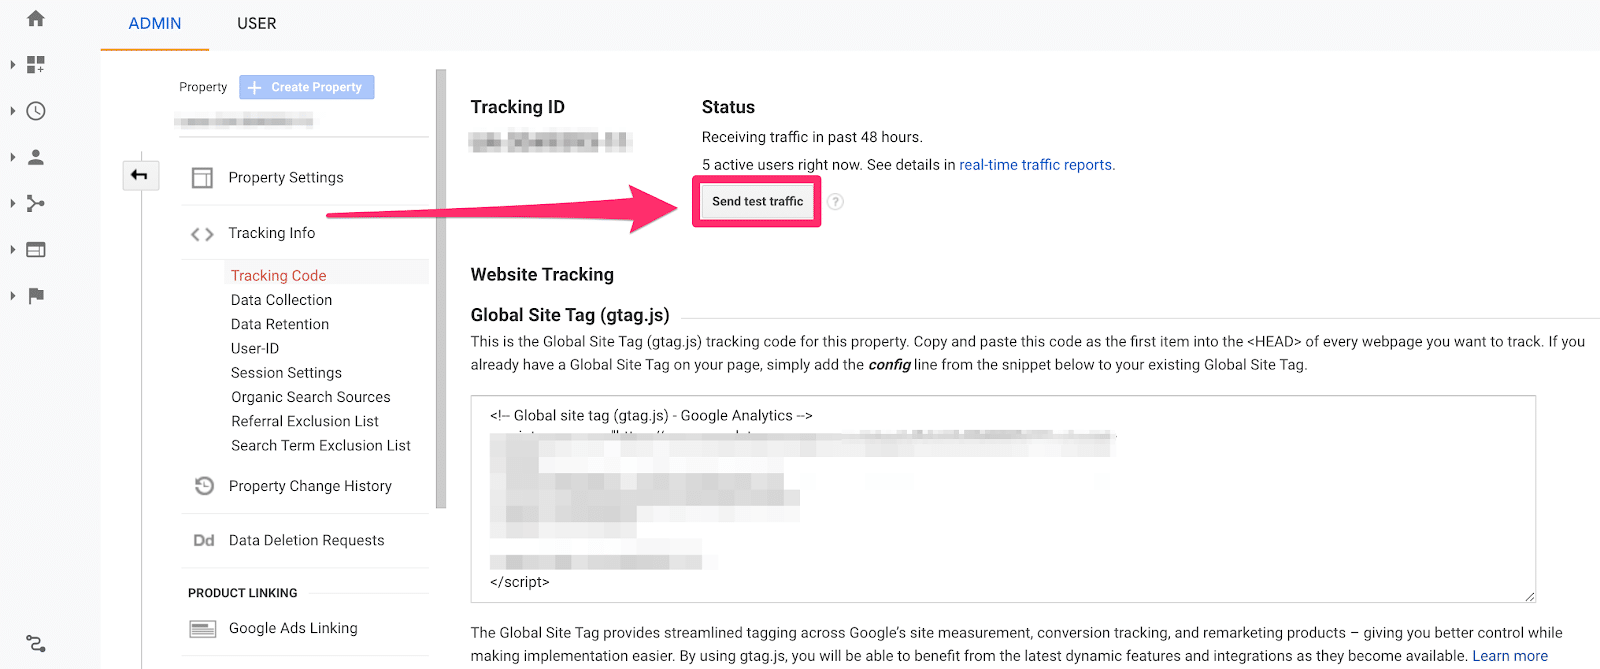 sending test traffic above global site tag location